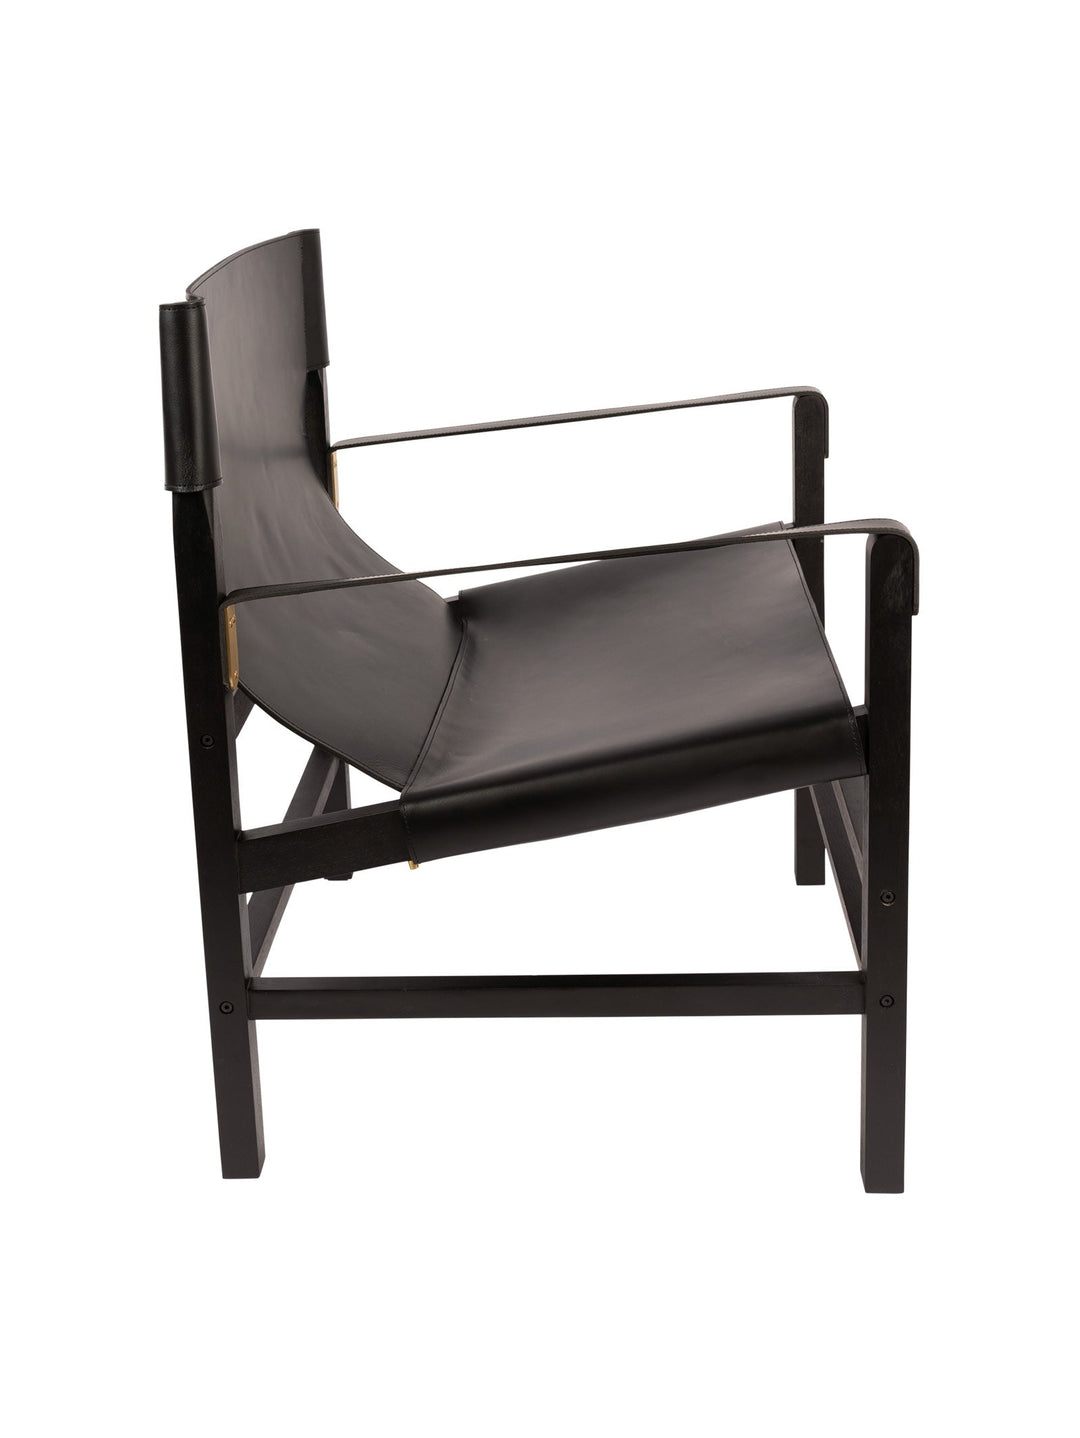 Colombo Occasional Chair - Hertex Haus Online - Furniture